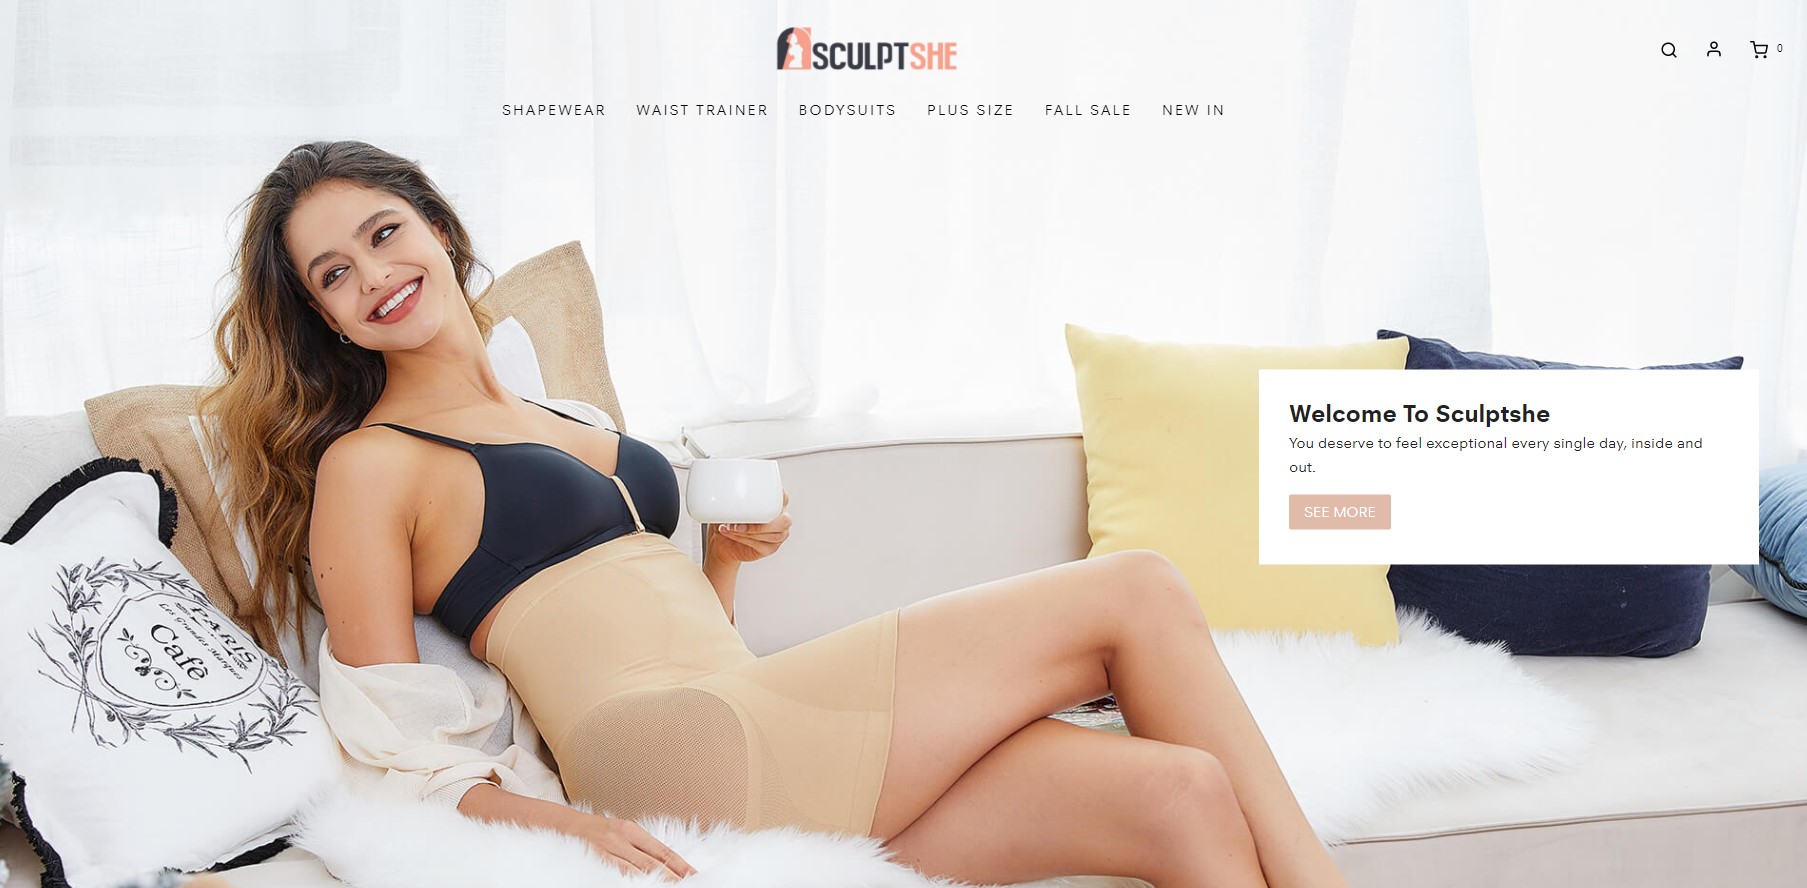 Shape Your Problematic Body Areas with SculptShe Shaperwear